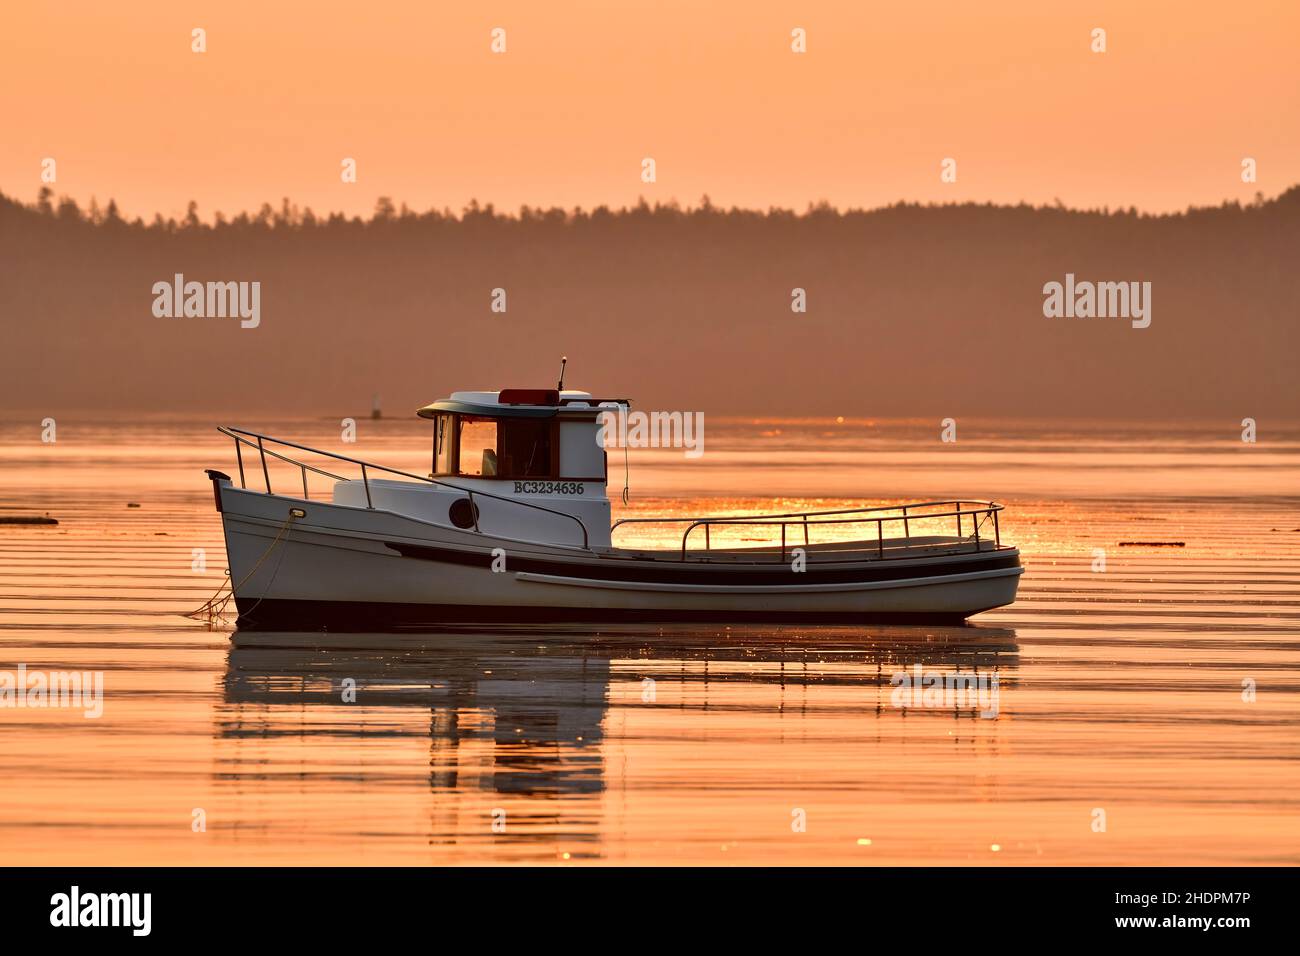 A smaller tug Boat in the early morning sunrise and moored in the harbor at near Ladysmith on Vancouver Island British Columbia Canada. Stock Photo